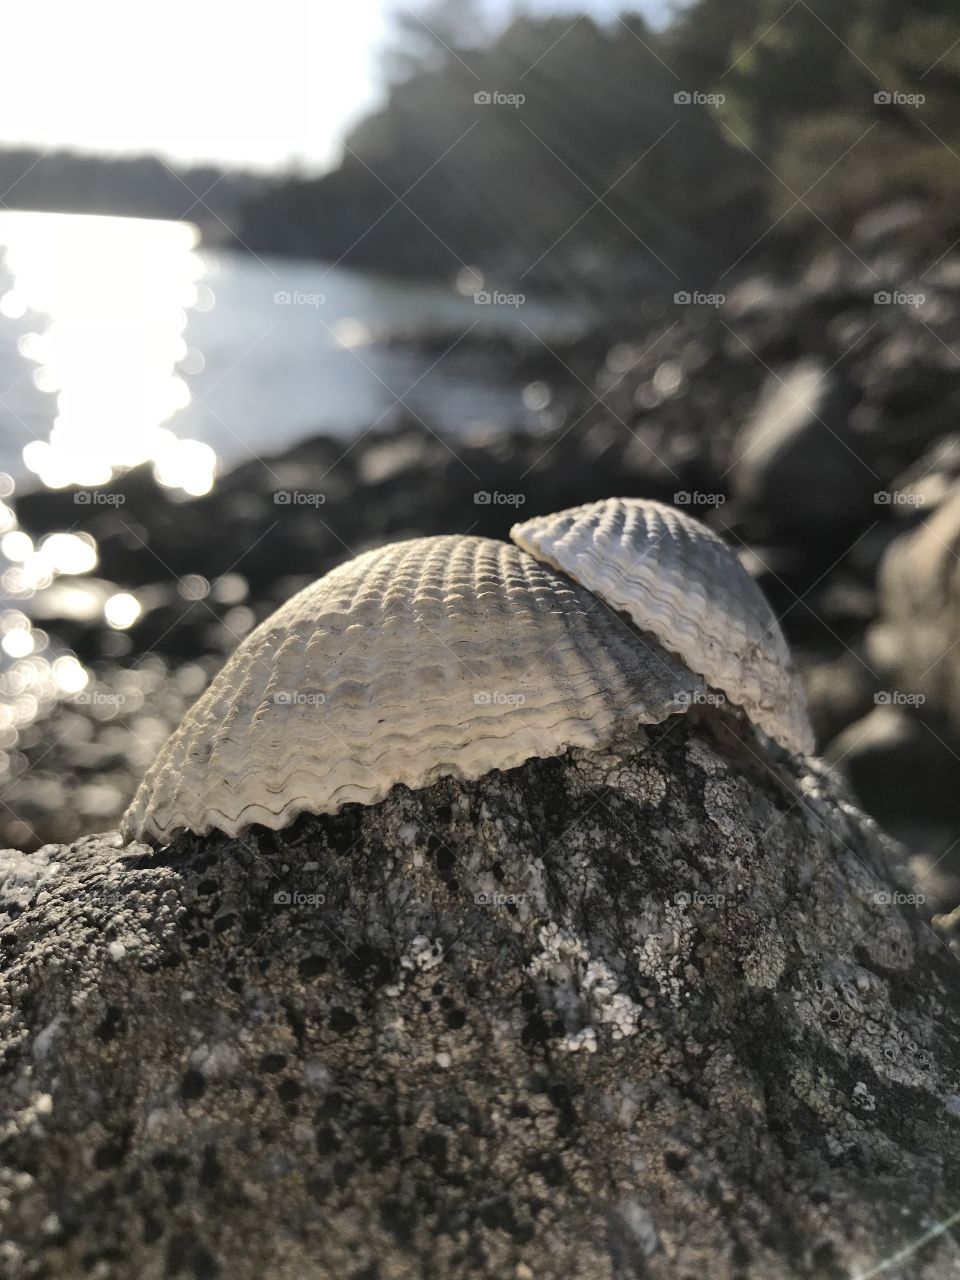 Nice shells laying on a stone with water in the background.                                      